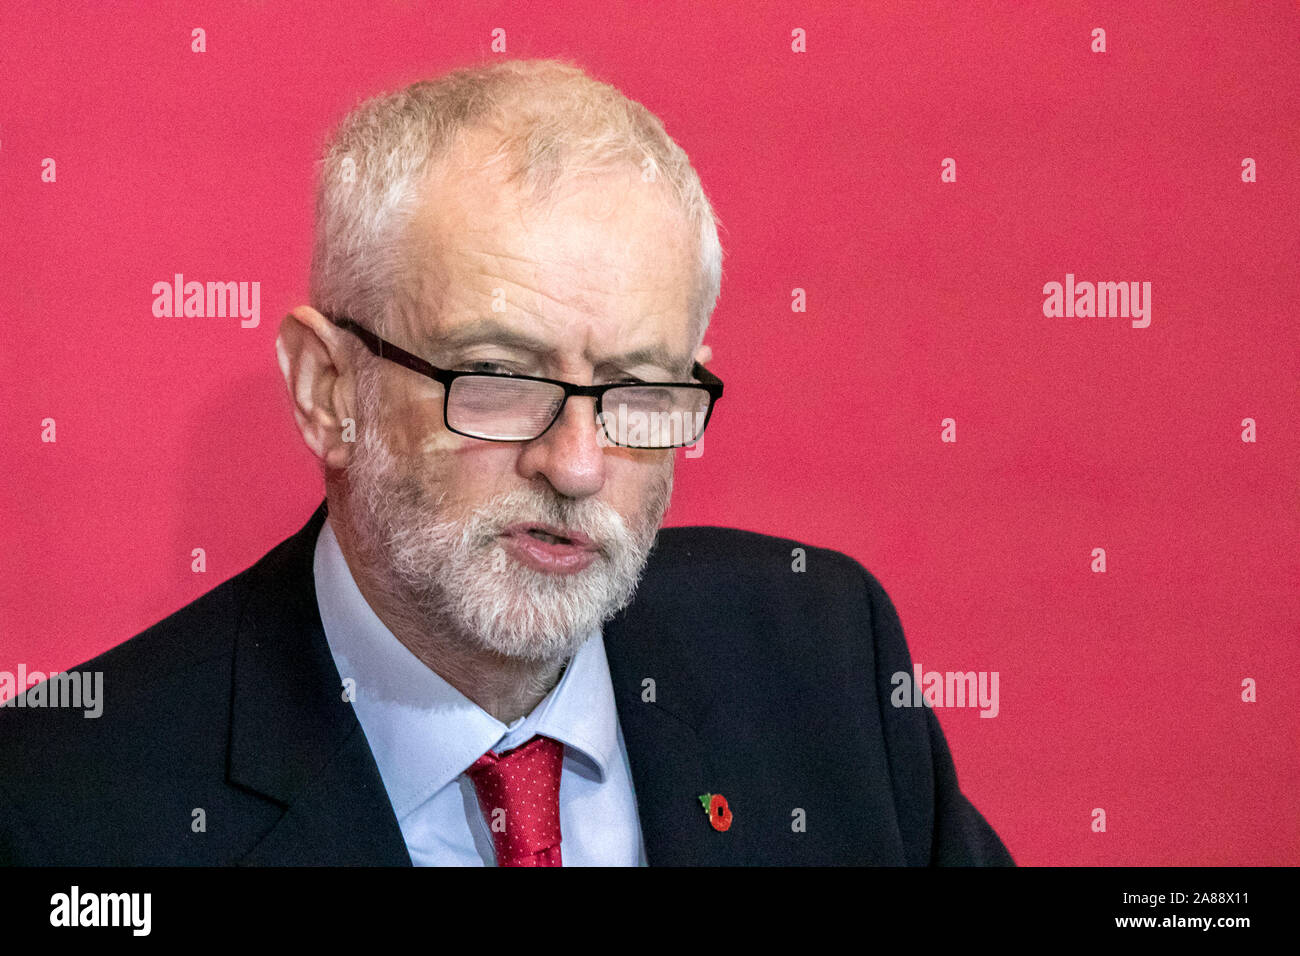 Liverpool, Merseyside. 7th November 2019.  Jeremy Corbyn MP, Leader of the Labour Party, speaking in the city of Liverpool to announce the first major policy announcement in the lead up to the 12th December General Election.  He is outlining plans to break up HM Treasury and move a big part of decision making to the north.  Mr McDonnell is also pledging an additional £150bn in a new Social Transformation Fund to be spent over the first five years of 'our Labour government'.  Credit: Cernan Elias/Alamy Live News Stock Photo